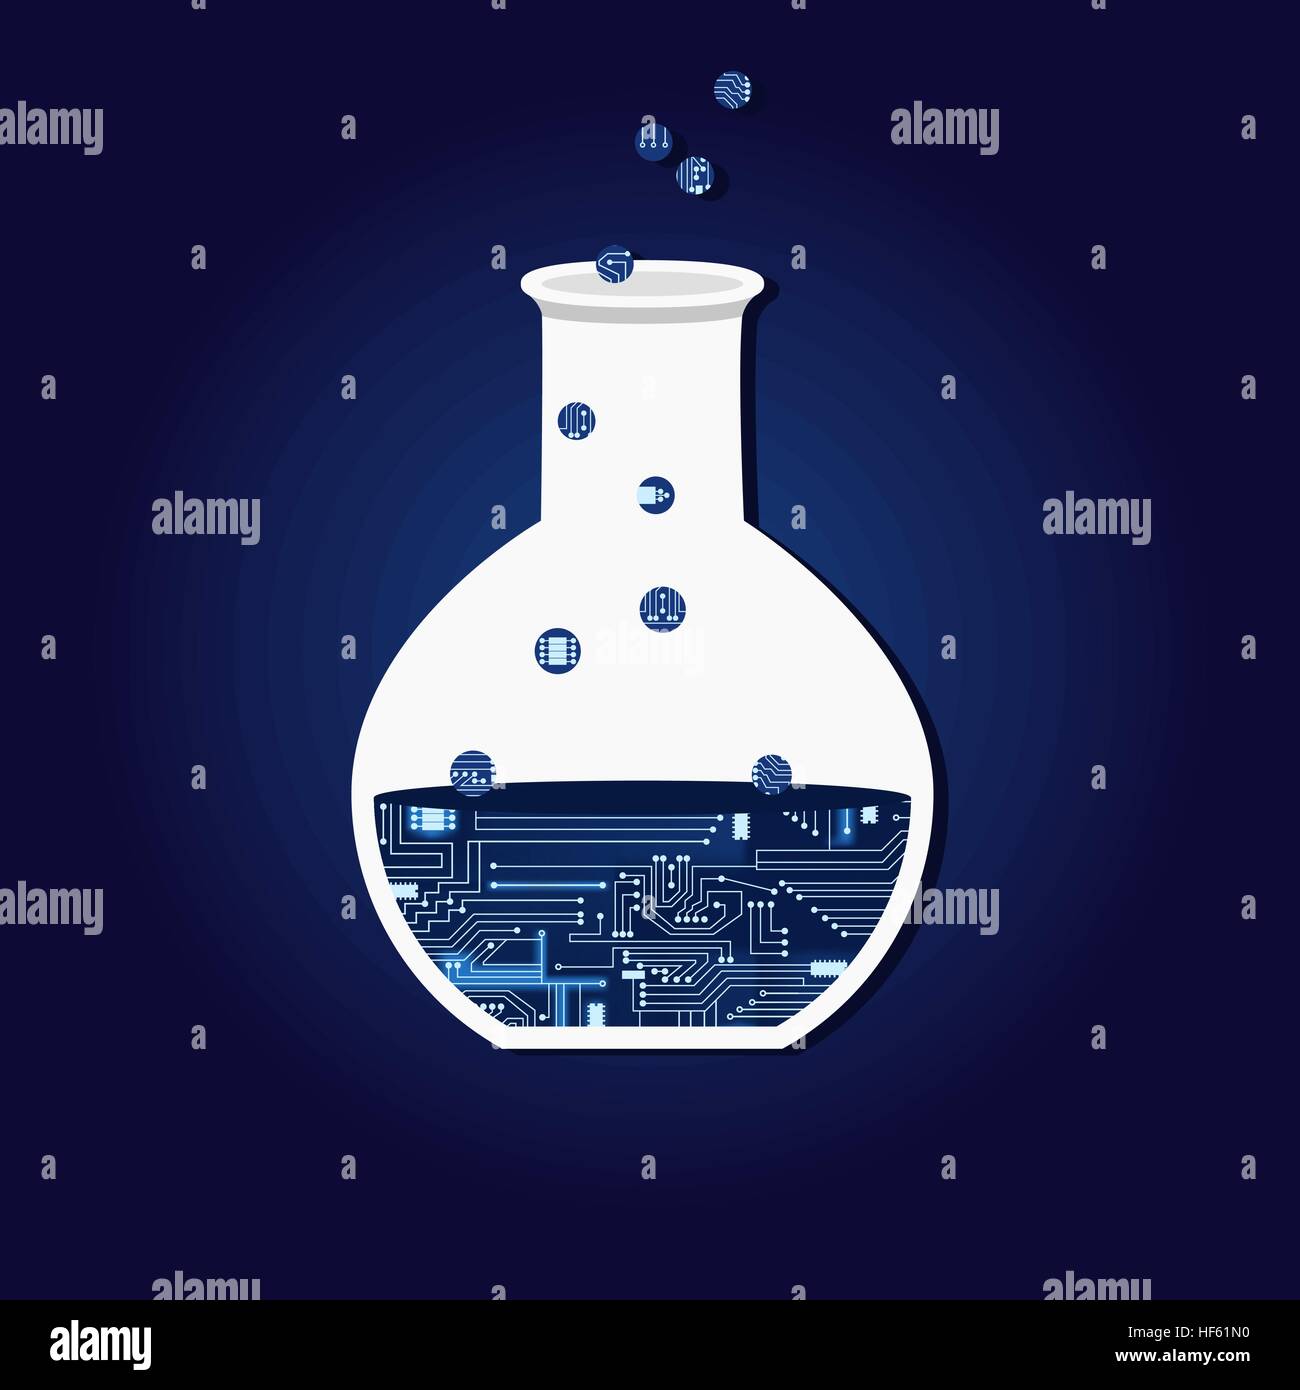 Test engineering Stock Vector Images - Alamy